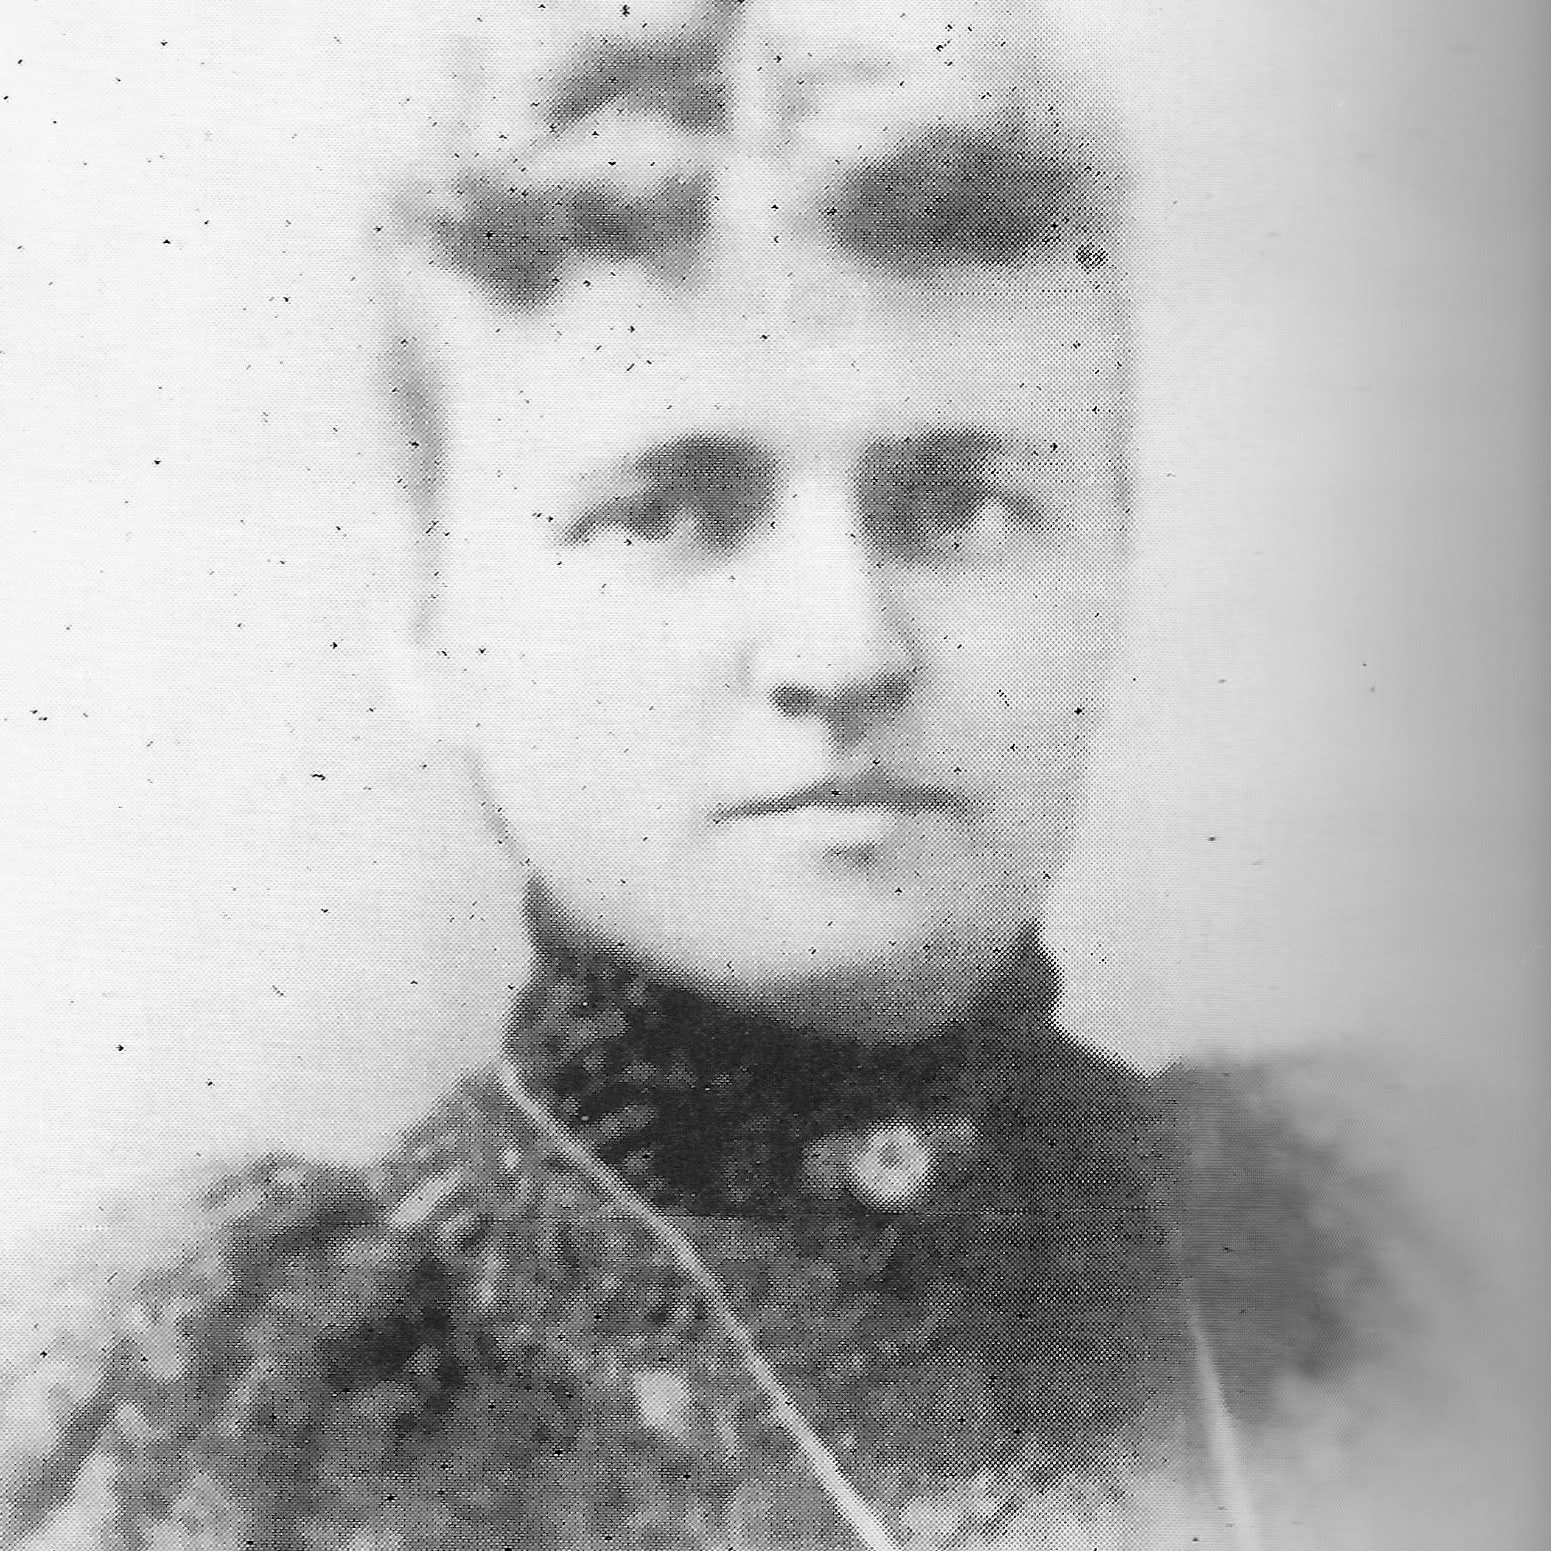 Photograph of Marian Shaw Smith - a woman with light hair pulled in a bun above her head and a black dress with collar